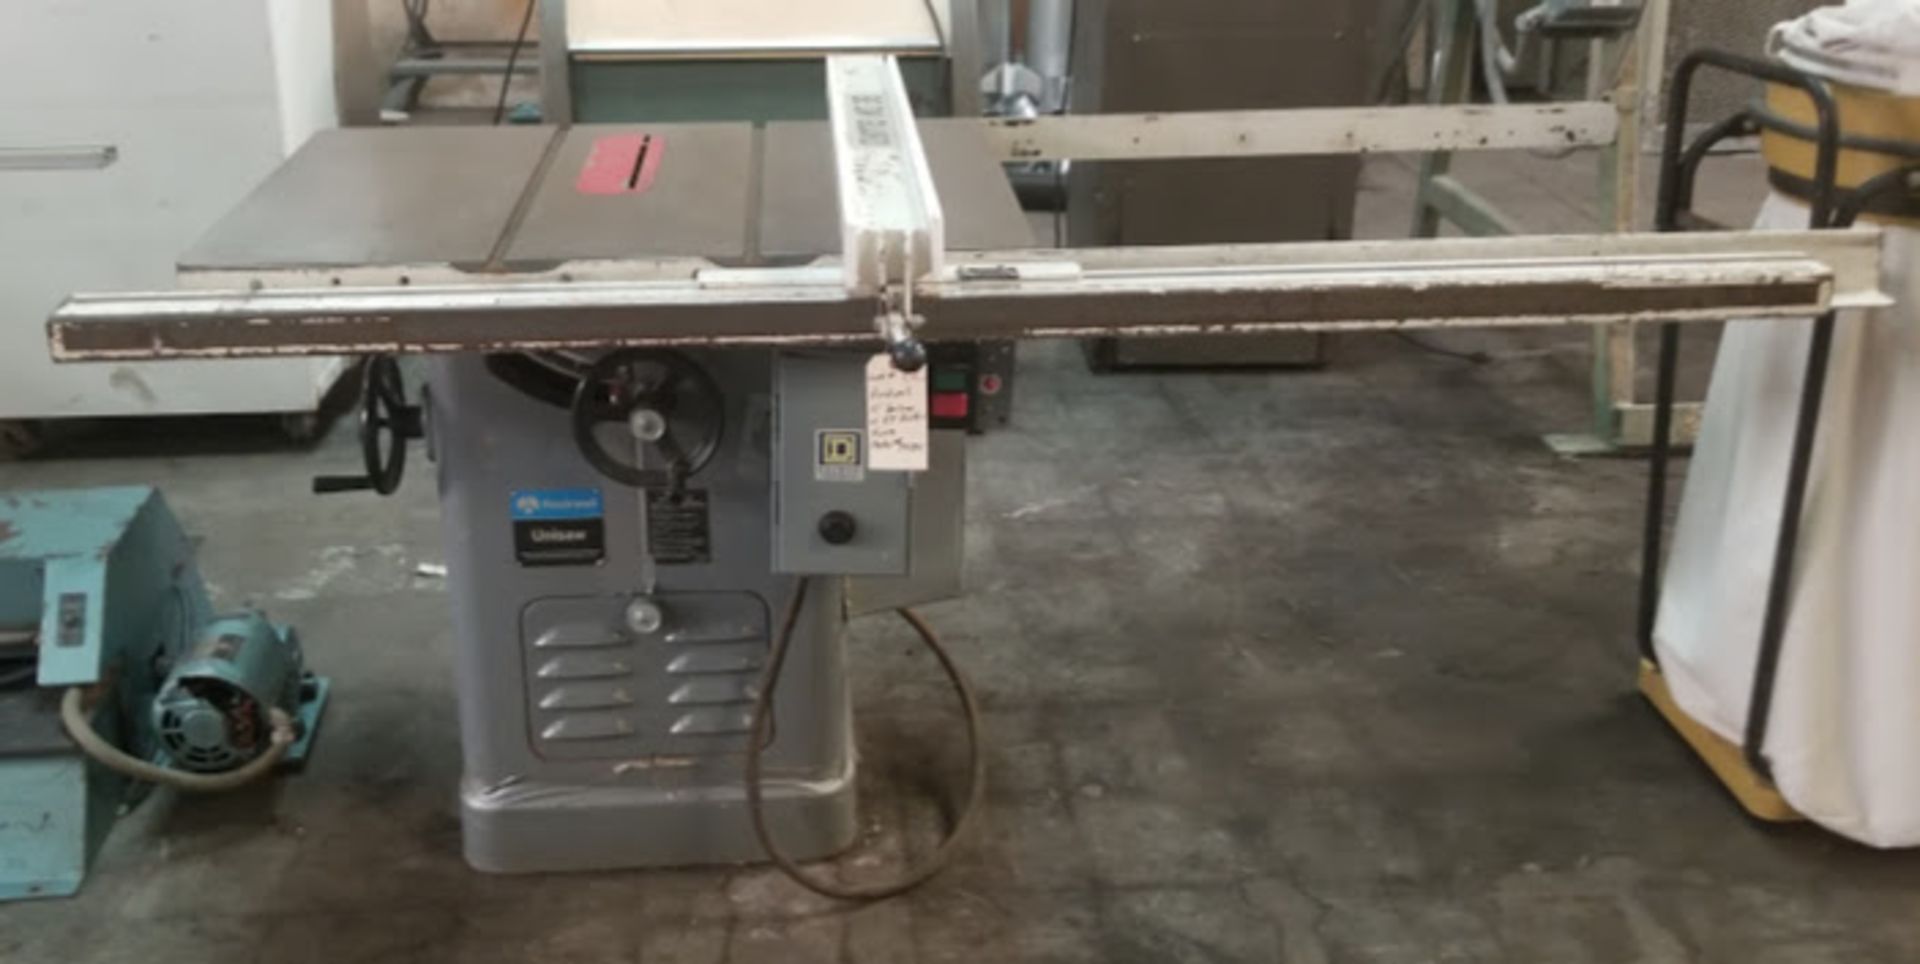 Rockwell 10" Unisaw Cabinet Table Saw, Model: 34-801 w/ 53" Rails & Fence - Image 2 of 3